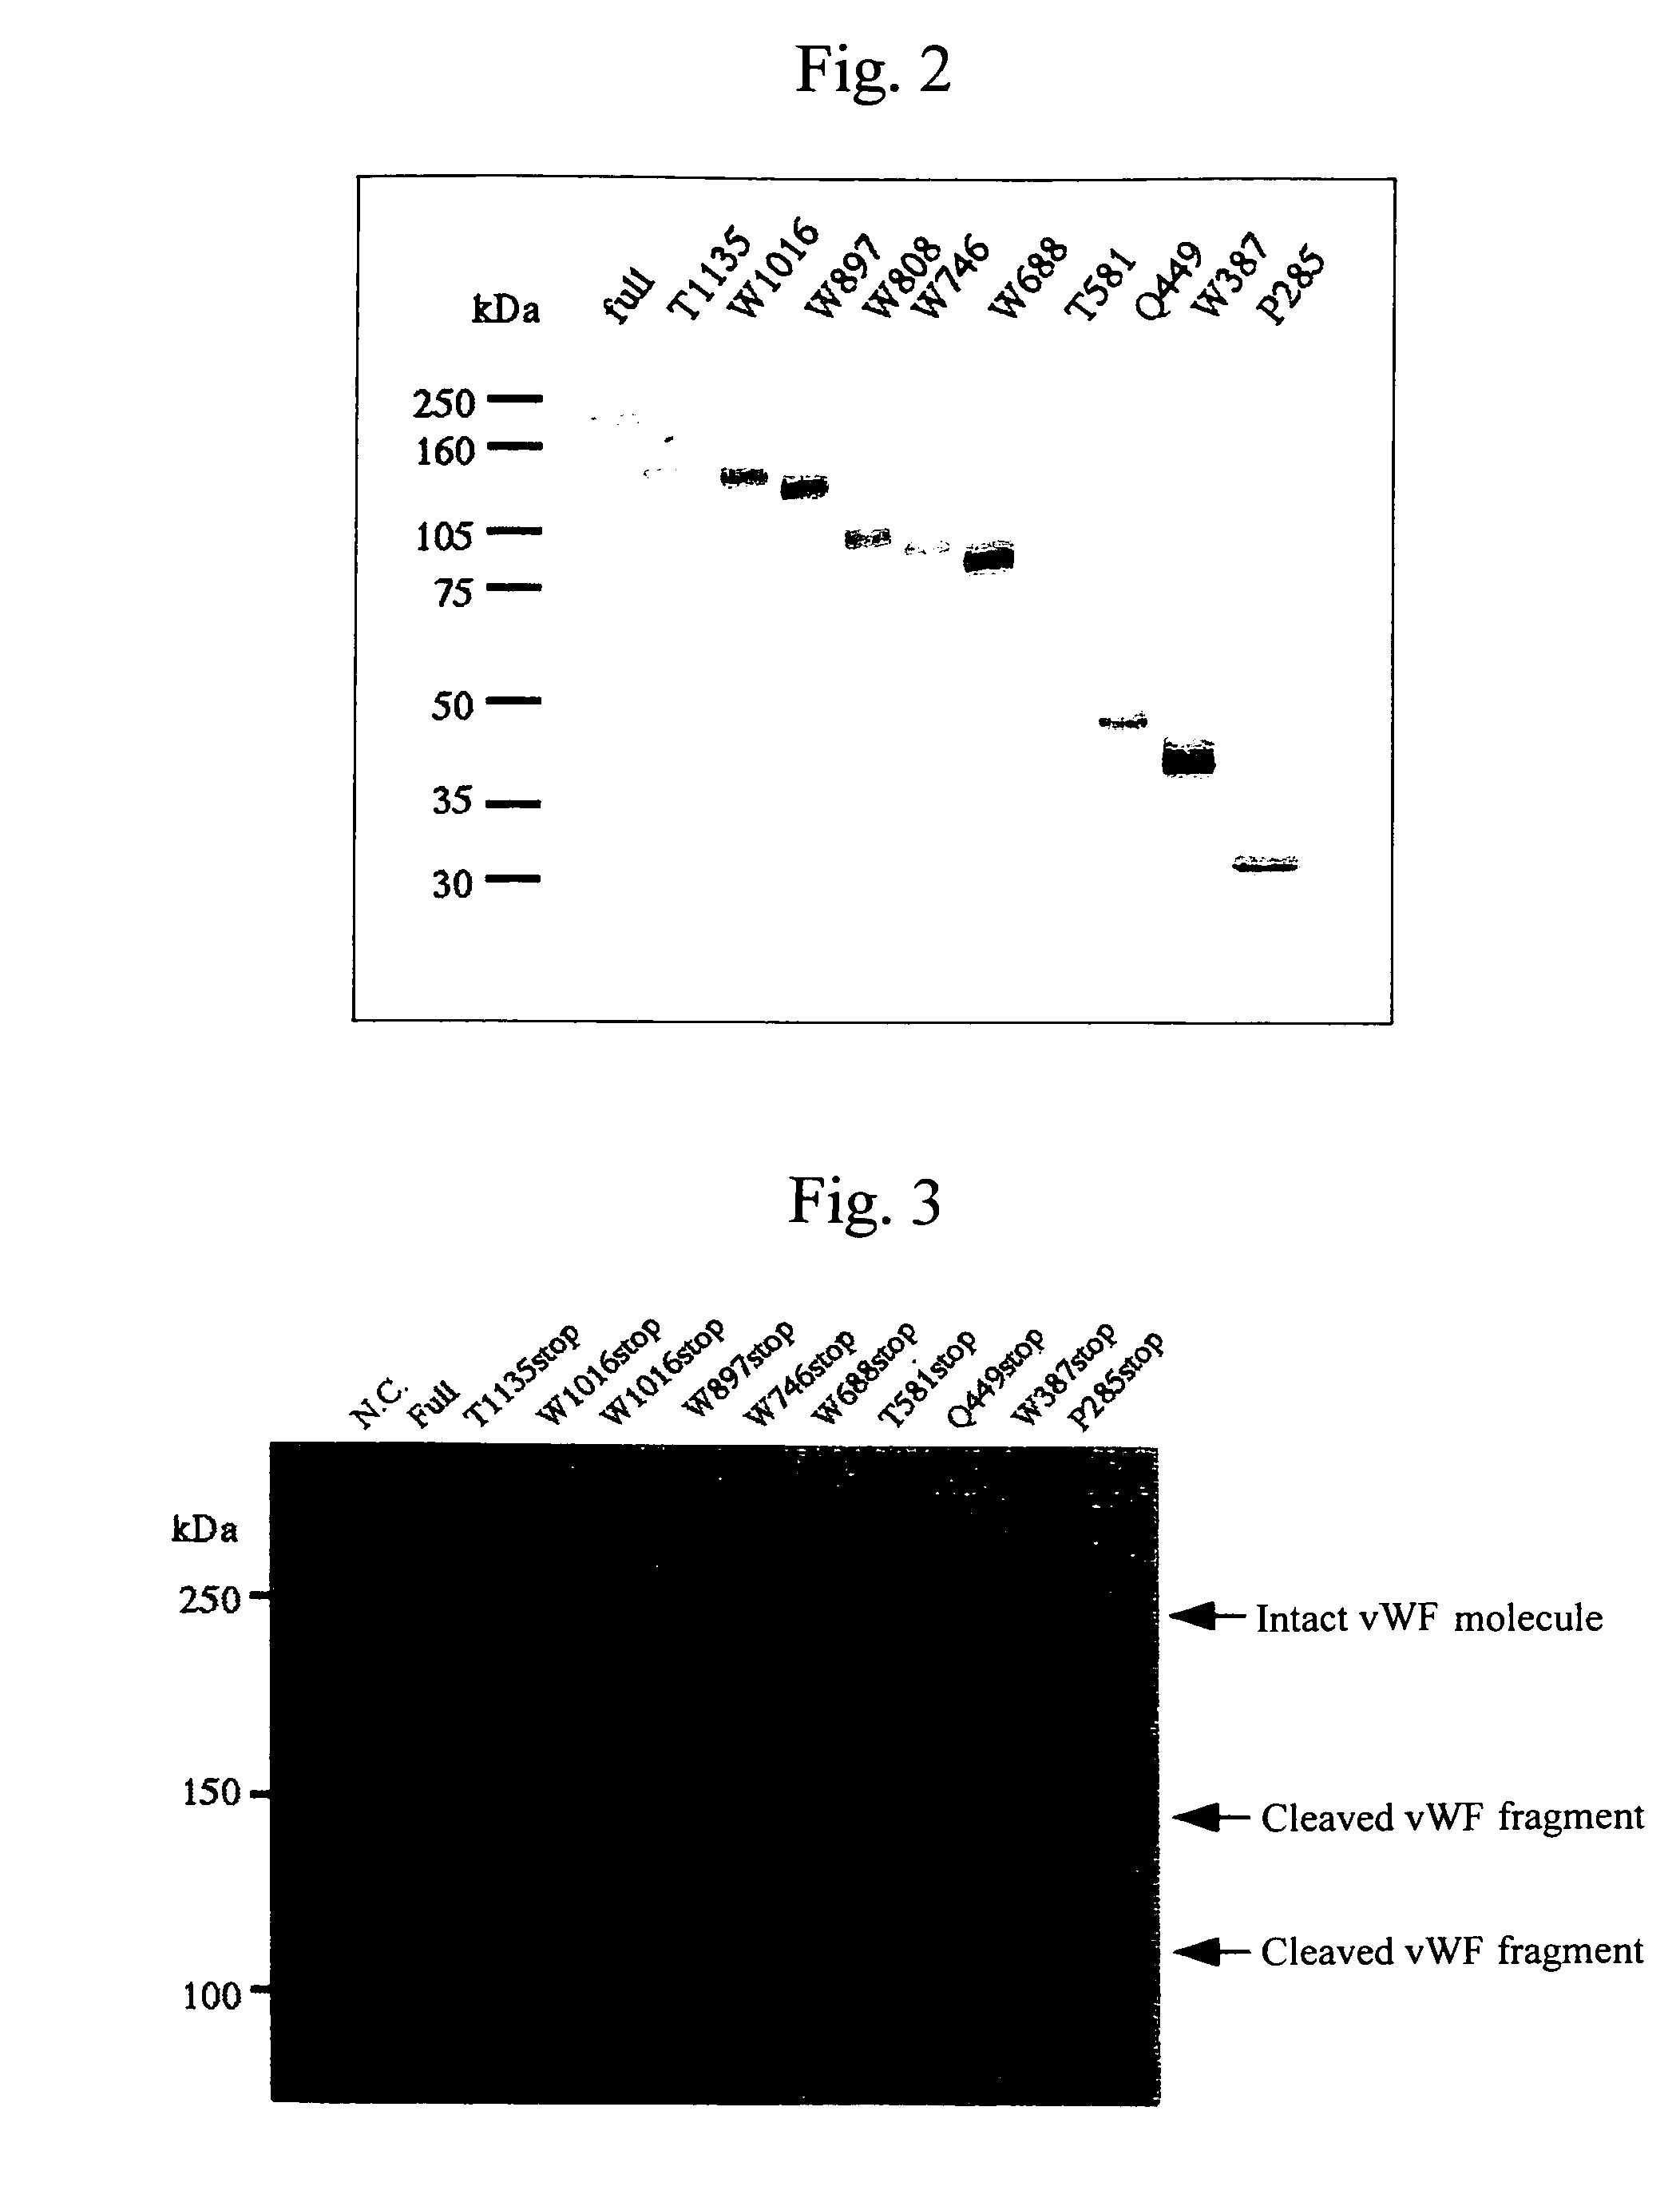 Antibody against von Willebrand factor cleaving enzyme and assay system using the same